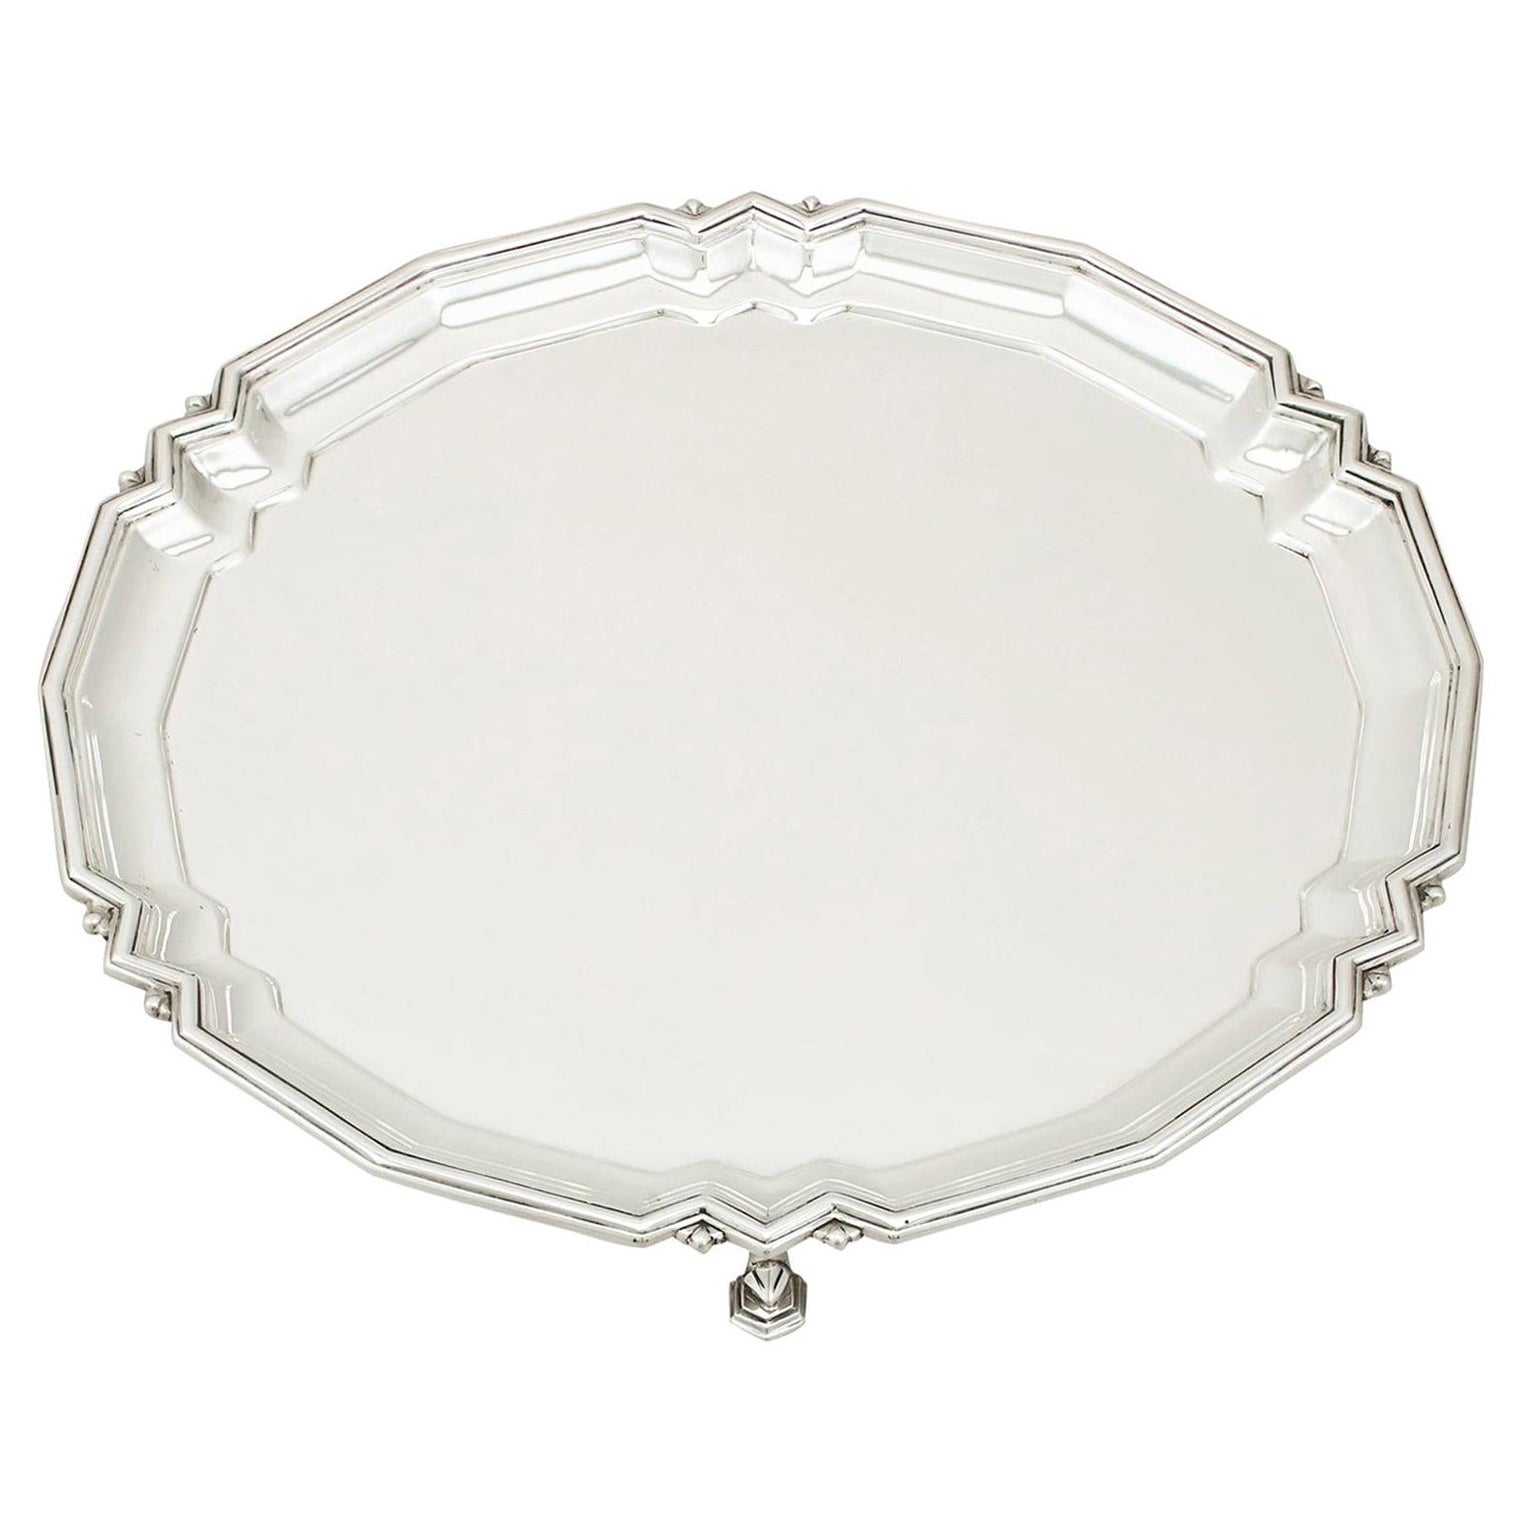 1933 Art Deco Antique Sterling Silver Salver by Mappin and Webb Ltd